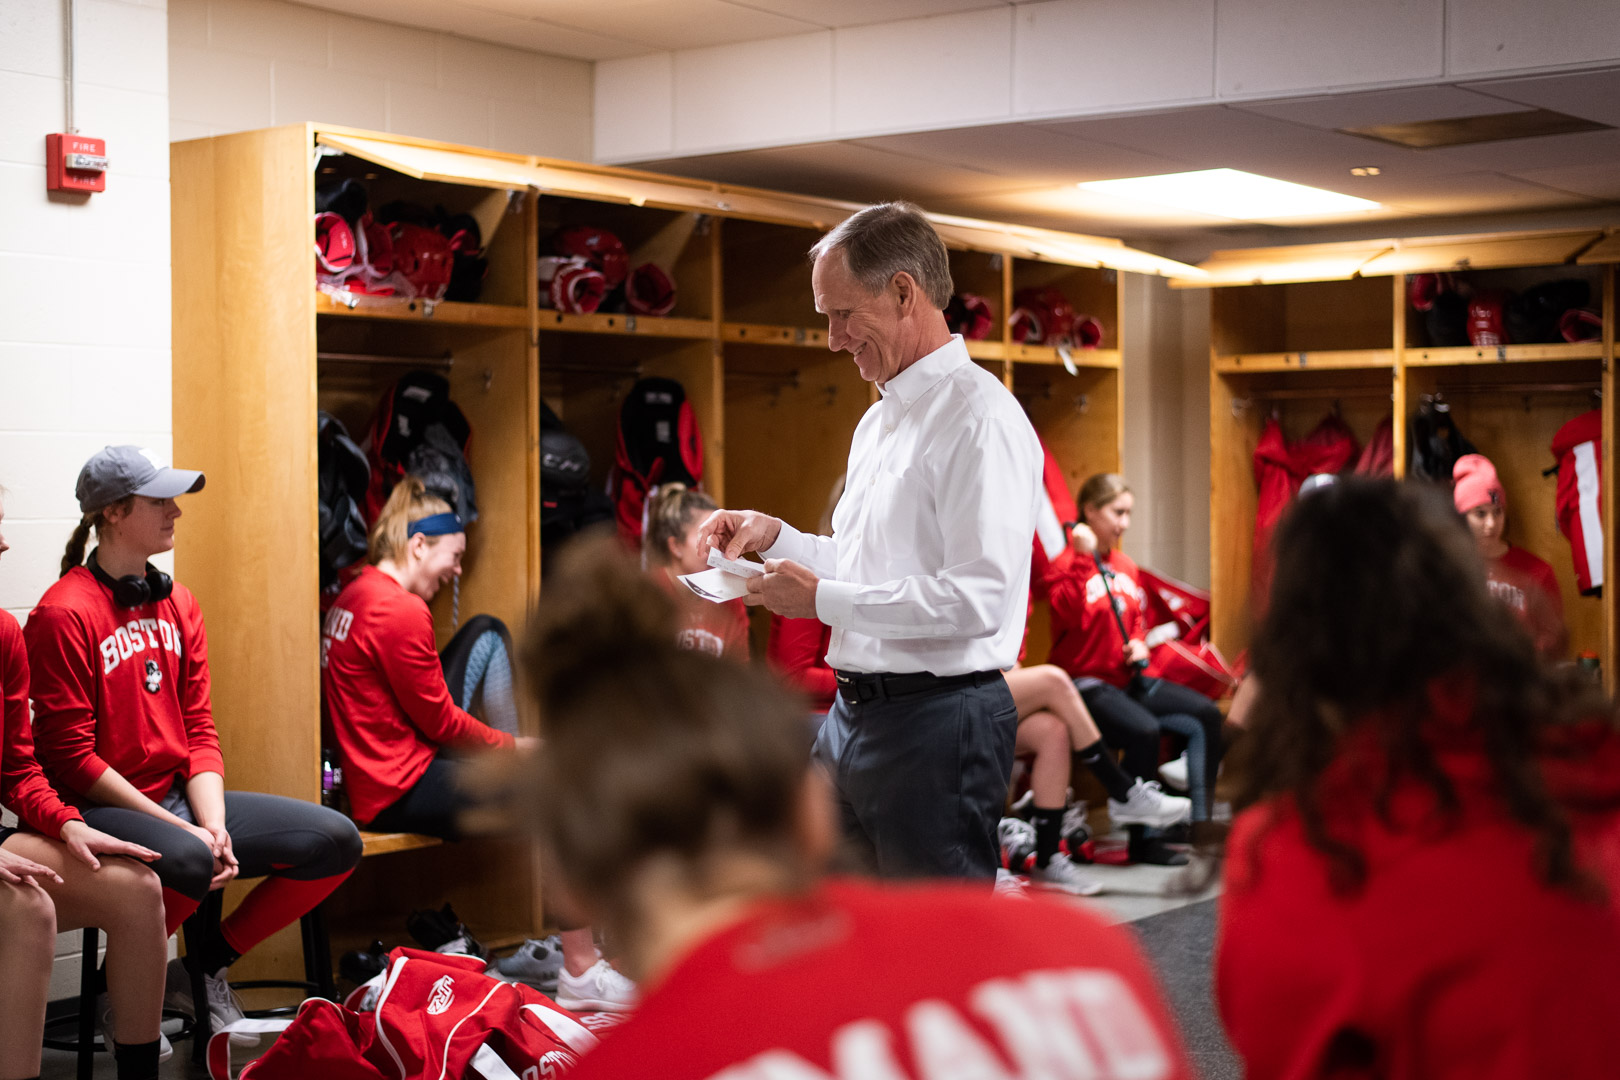 Photo: Brian Durocher a white man wearing a white collared shirt and black pants, smiles as he looks over his notes and speaks to the women's ice hockey team as they sit in their locker room.